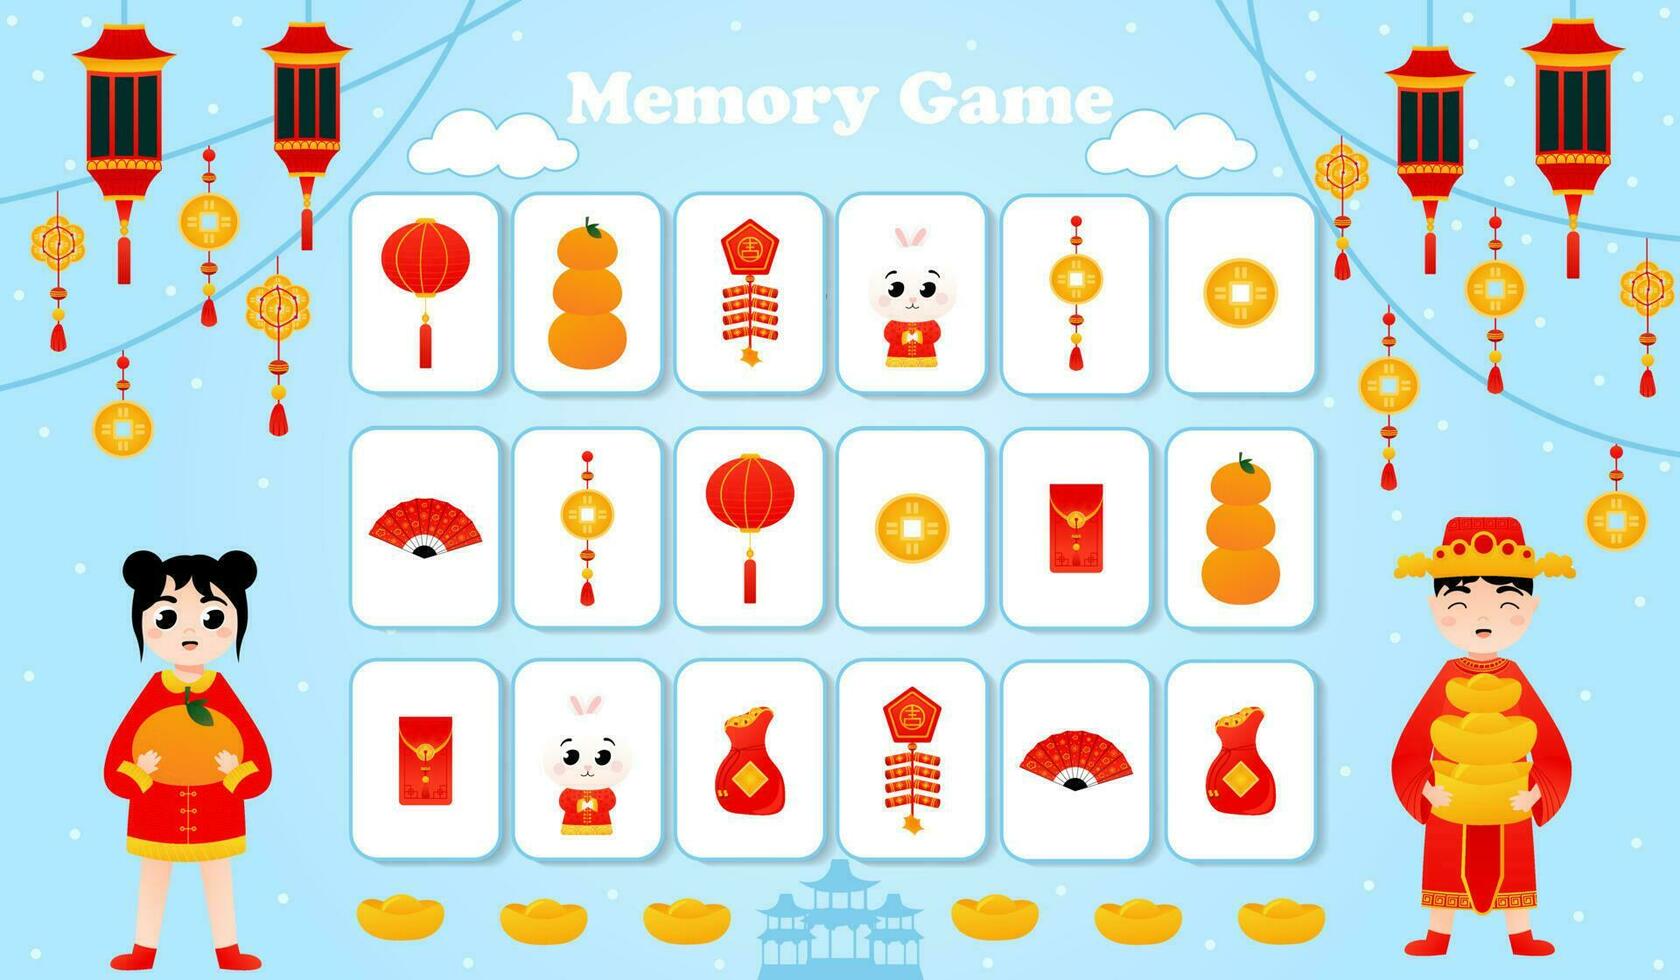 Memory game for kids with lunar new year elements concept, printable worksheet for kid is cartoon style, girl with tangerine and boy with ingots on blue background vector